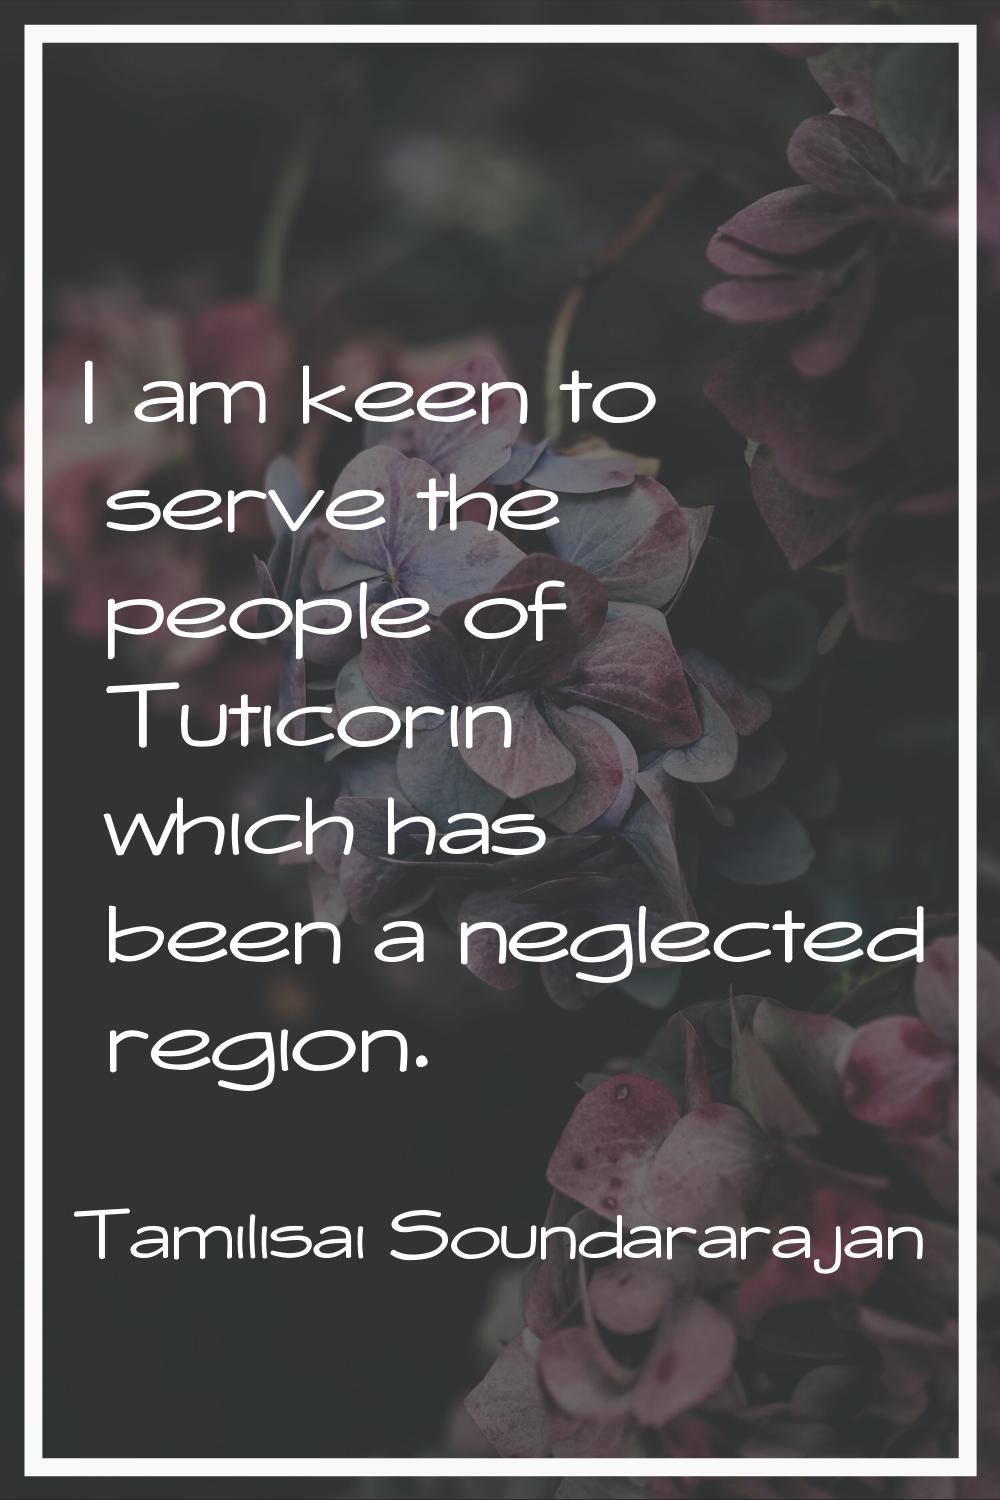 I am keen to serve the people of Tuticorin which has been a neglected region.